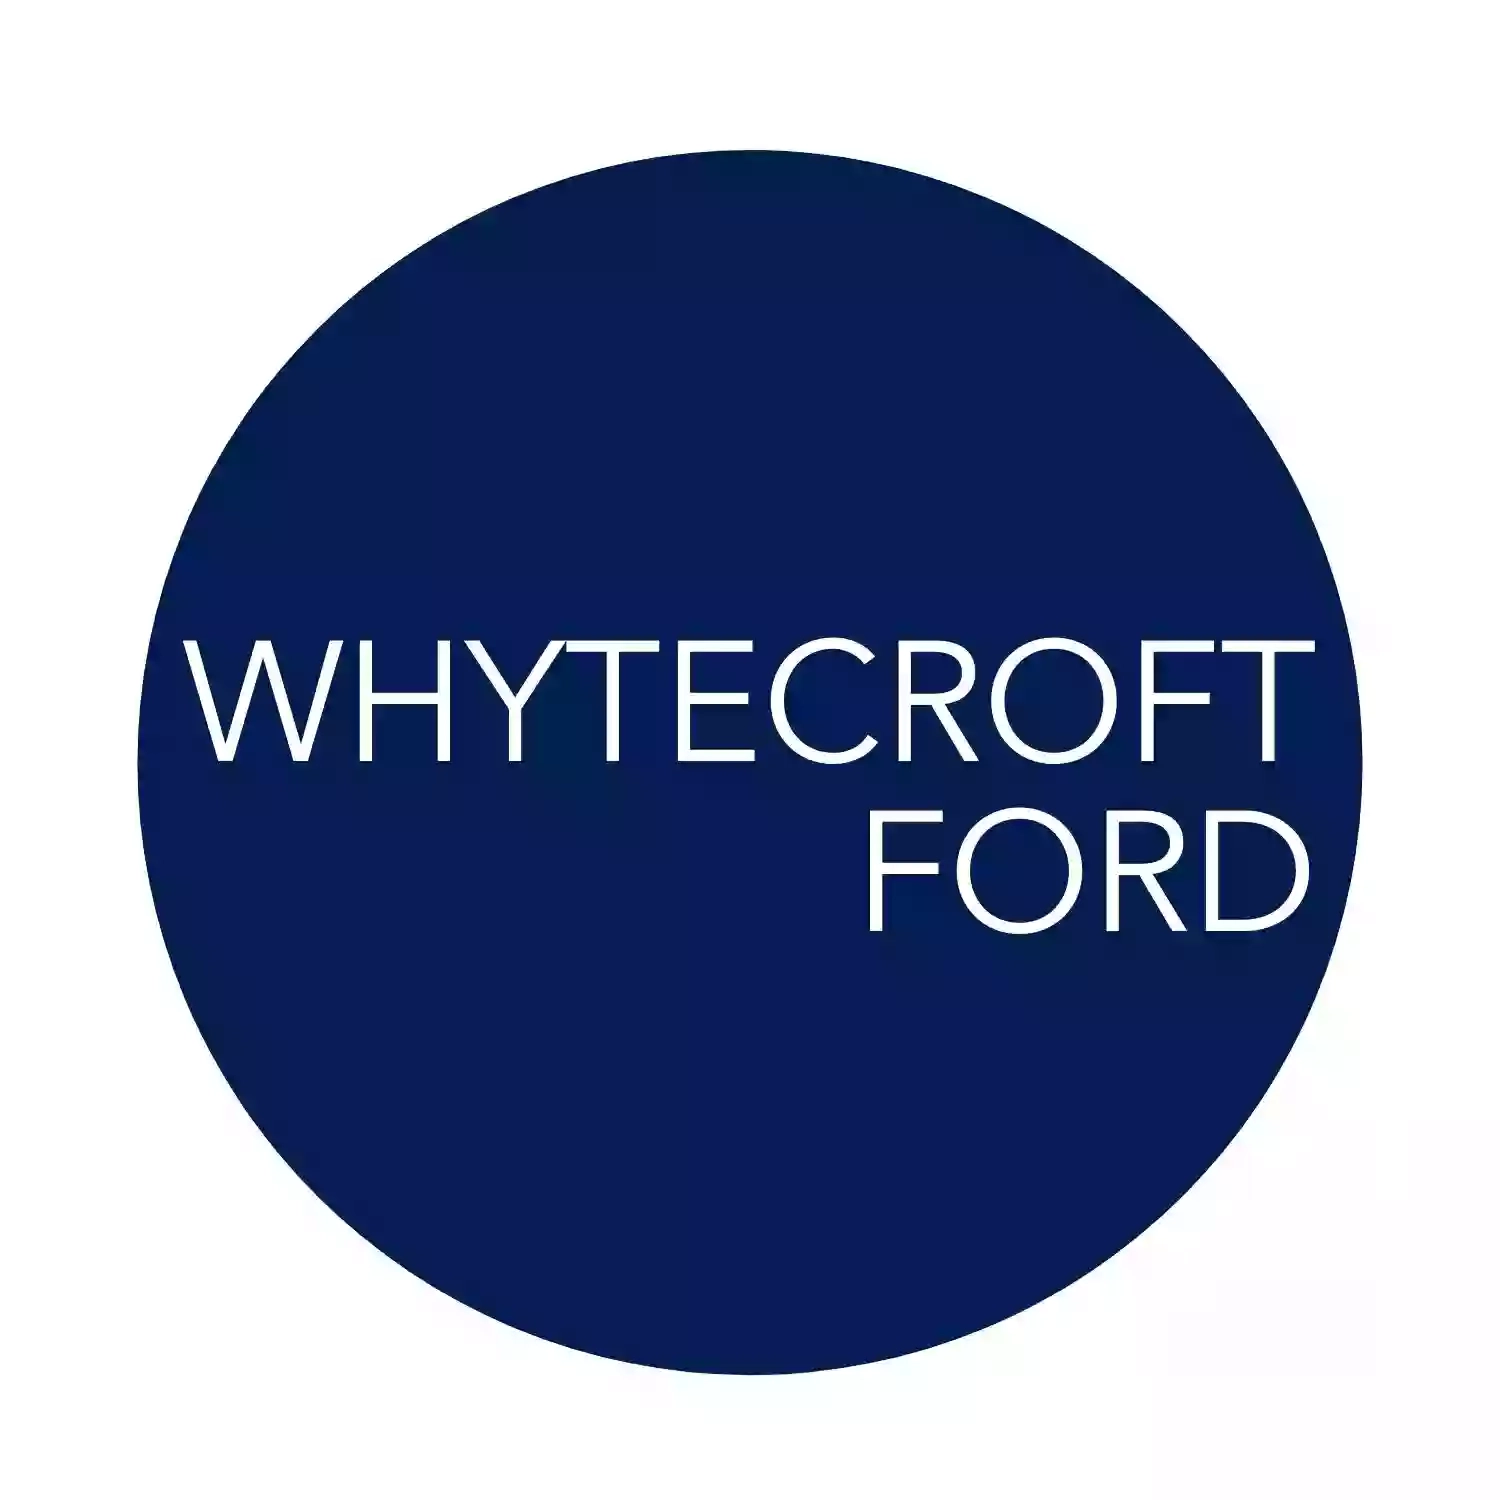 Whytecroft Ford